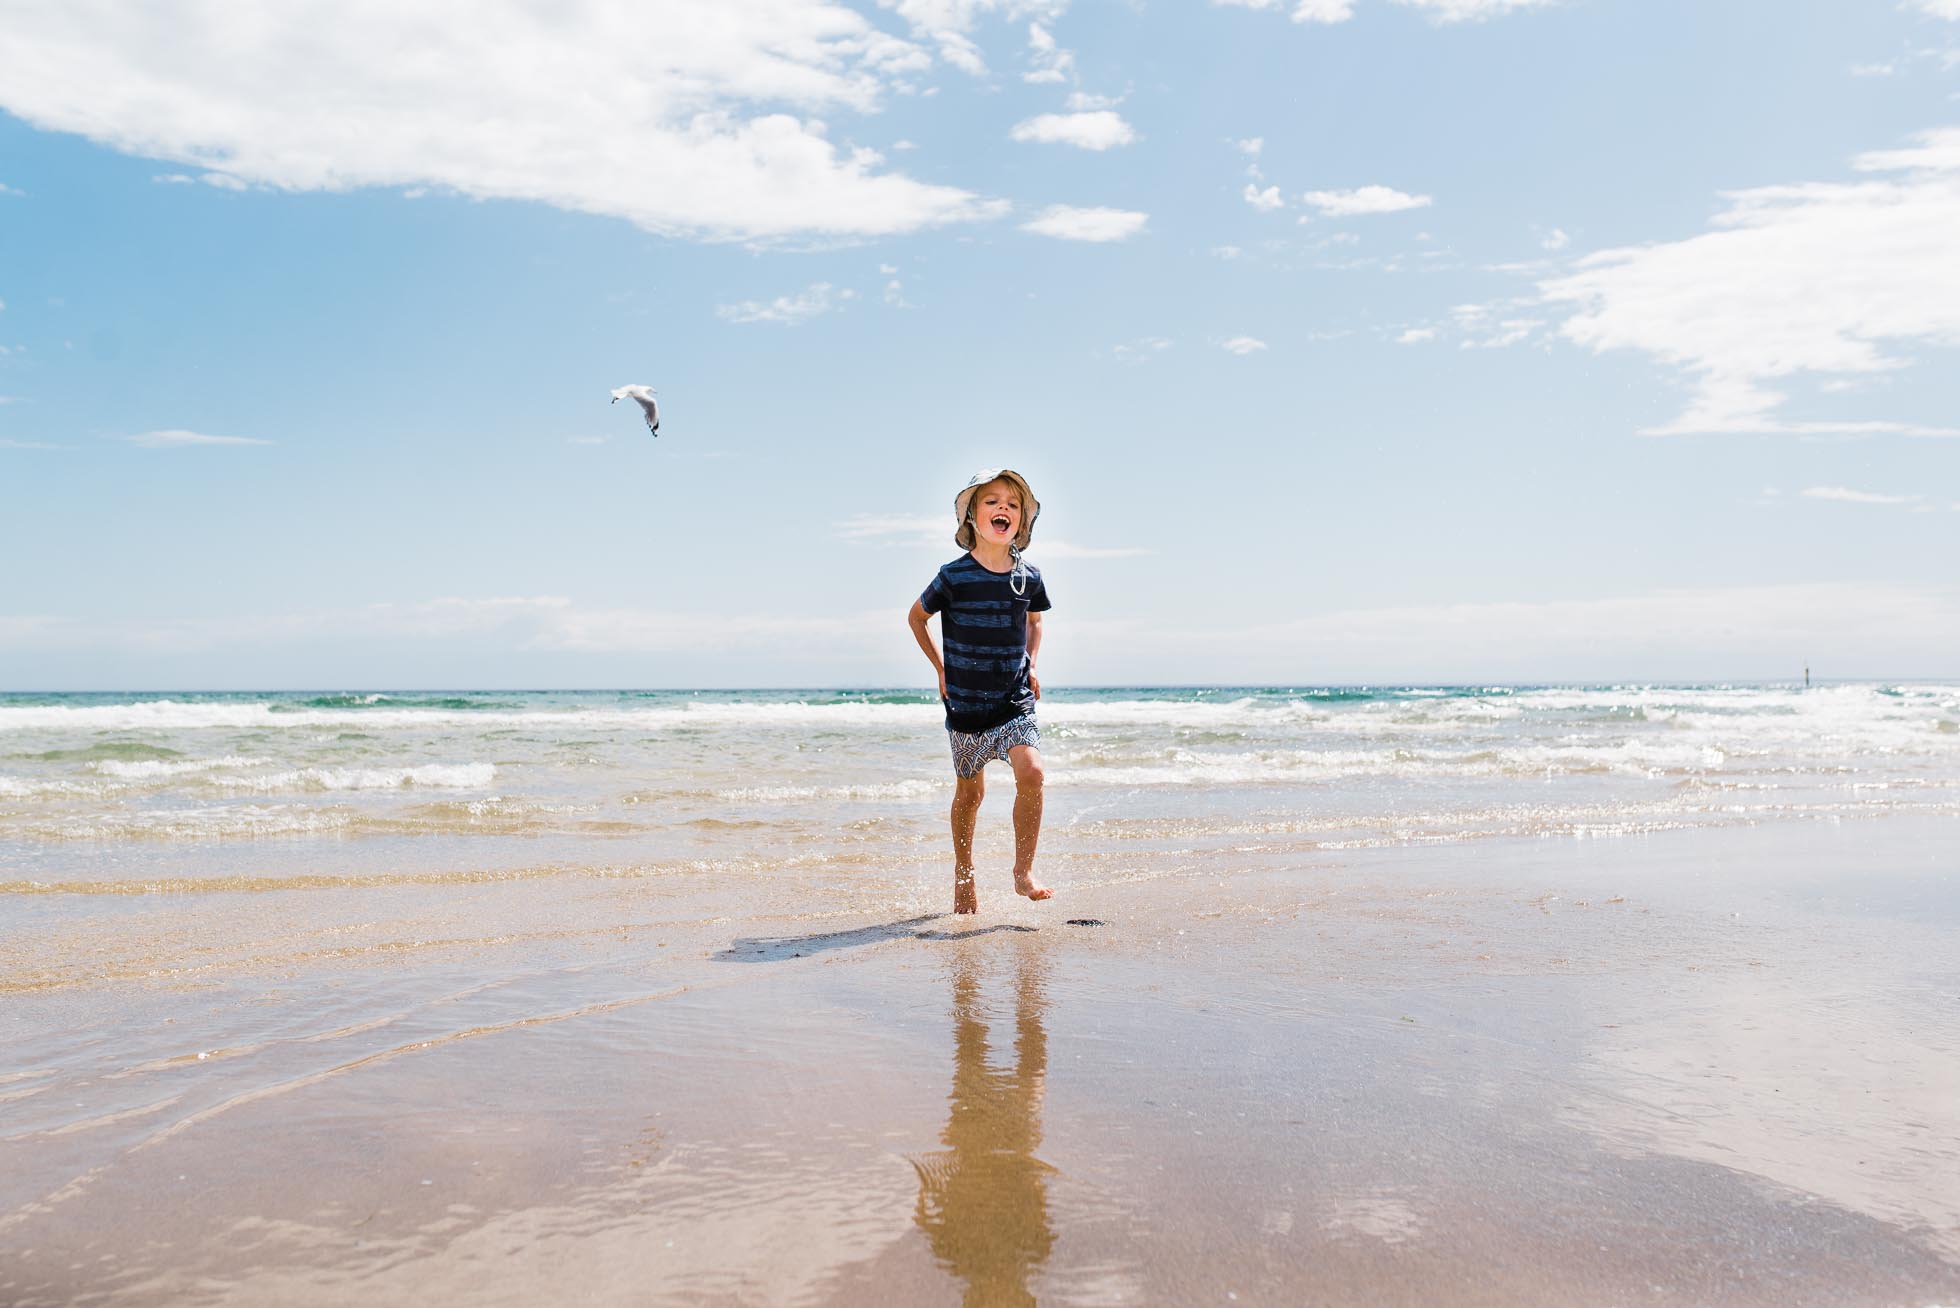 A Boy at the Beach by Jenny Rusby